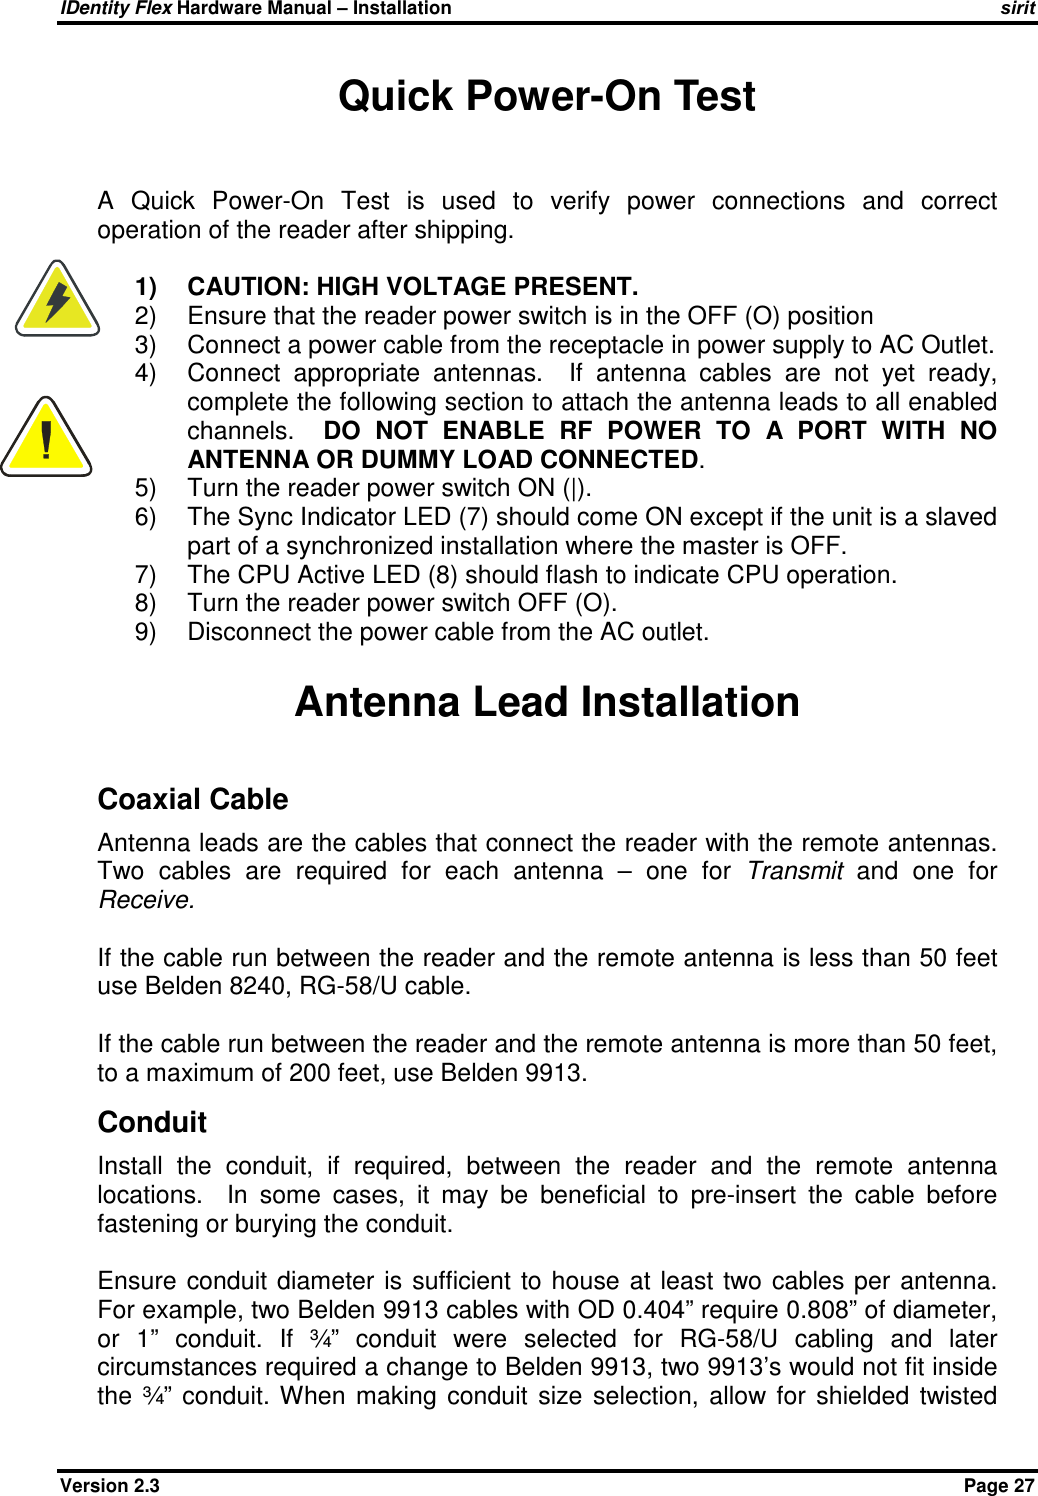 IDentity Flex Hardware Manual – Installation   sirit Version 2.3    Page 27 Quick Power-On Test  A  Quick  Power-On  Test  is  used  to  verify  power  connections  and  correct operation of the reader after shipping.  1)  CAUTION: HIGH VOLTAGE PRESENT. 2)  Ensure that the reader power switch is in the OFF (O) position 3)  Connect a power cable from the receptacle in power supply to AC Outlet. 4)  Connect  appropriate  antennas.    If  antenna  cables  are  not  yet  ready, complete the following section to attach the antenna leads to all enabled channels.    DO  NOT  ENABLE  RF  POWER  TO  A  PORT  WITH  NO ANTENNA OR DUMMY LOAD CONNECTED. 5)  Turn the reader power switch ON (|). 6)  The Sync Indicator LED (7) should come ON except if the unit is a slaved part of a synchronized installation where the master is OFF. 7)  The CPU Active LED (8) should flash to indicate CPU operation. 8)  Turn the reader power switch OFF (O). 9)  Disconnect the power cable from the AC outlet.  Antenna Lead Installation Coaxial Cable Antenna leads are the cables that connect the reader with the remote antennas.  Two  cables  are  required  for  each  antenna  –  one  for  Transmit  and  one  for Receive.  If the cable run between the reader and the remote antenna is less than 50 feet use Belden 8240, RG-58/U cable.  If the cable run between the reader and the remote antenna is more than 50 feet, to a maximum of 200 feet, use Belden 9913. Conduit Install  the  conduit,  if  required,  between  the  reader  and  the  remote  antenna locations.    In  some  cases,  it  may  be  beneficial  to  pre-insert  the  cable  before fastening or burying the conduit.    Ensure  conduit  diameter  is  sufficient  to  house  at least  two cables per  antenna.  For example, two Belden 9913 cables with OD 0.404” require 0.808” of diameter, or  1”  conduit.  If  ¾”  conduit  were  selected  for  RG-58/U  cabling  and  later circumstances required a change to Belden 9913, two 9913’s would not fit inside the  ¾”  conduit.  When  making  conduit  size  selection,  allow  for  shielded  twisted   